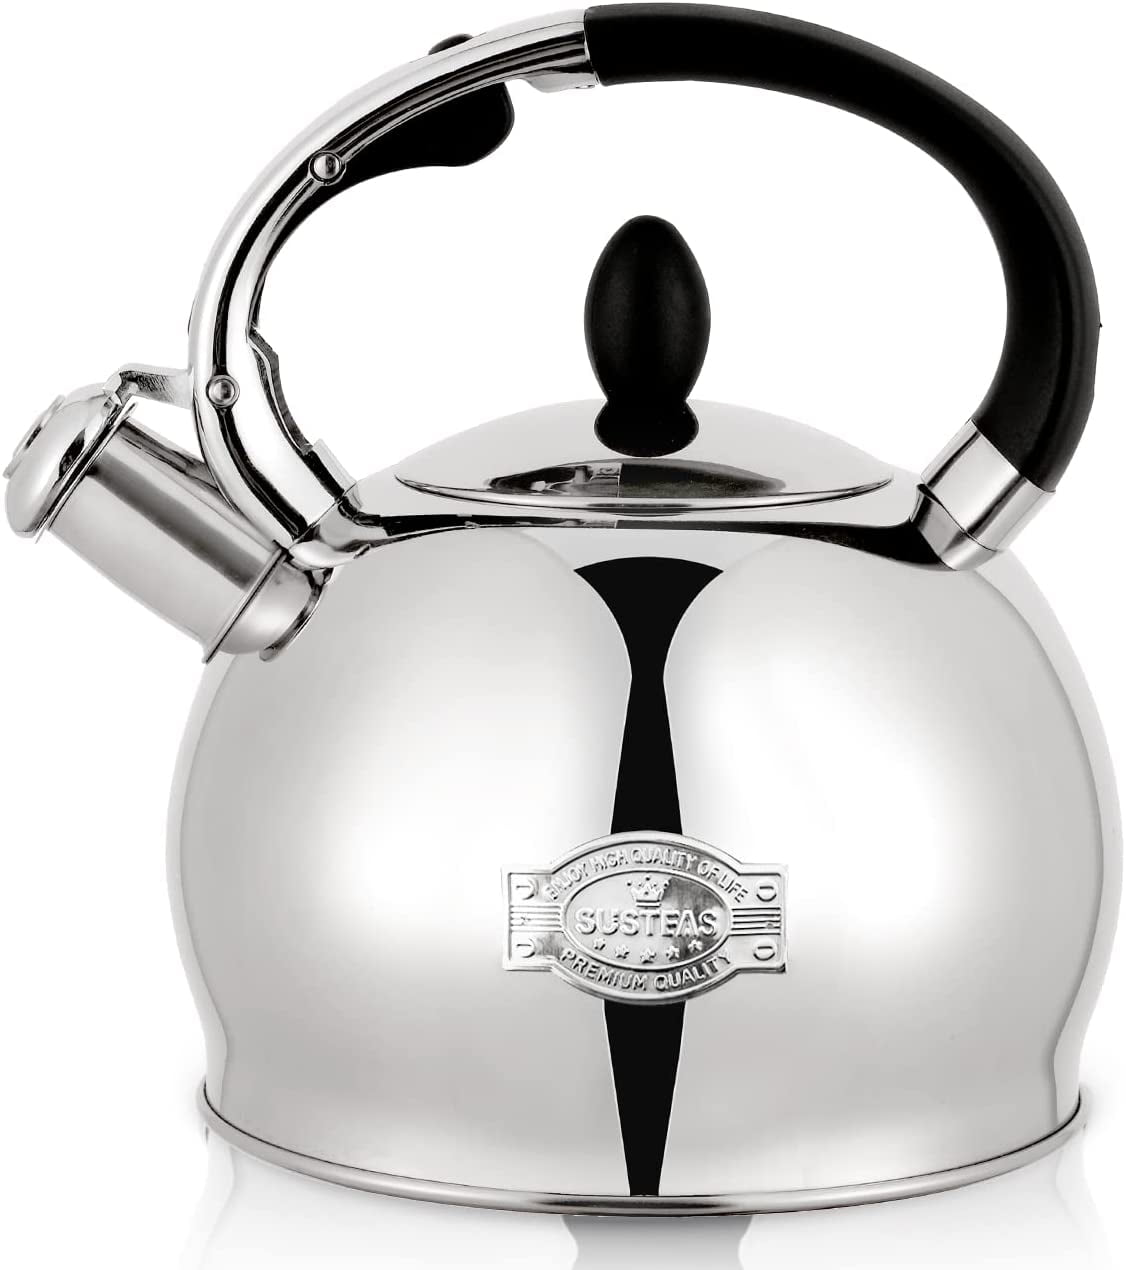 SUSTEAS Tea Kettle for Stove Top, Whistling Teapot with Cool Toch Ergonomic  Handle, 2.64 Quart Retro Stainless Steel Kettle, Silver 